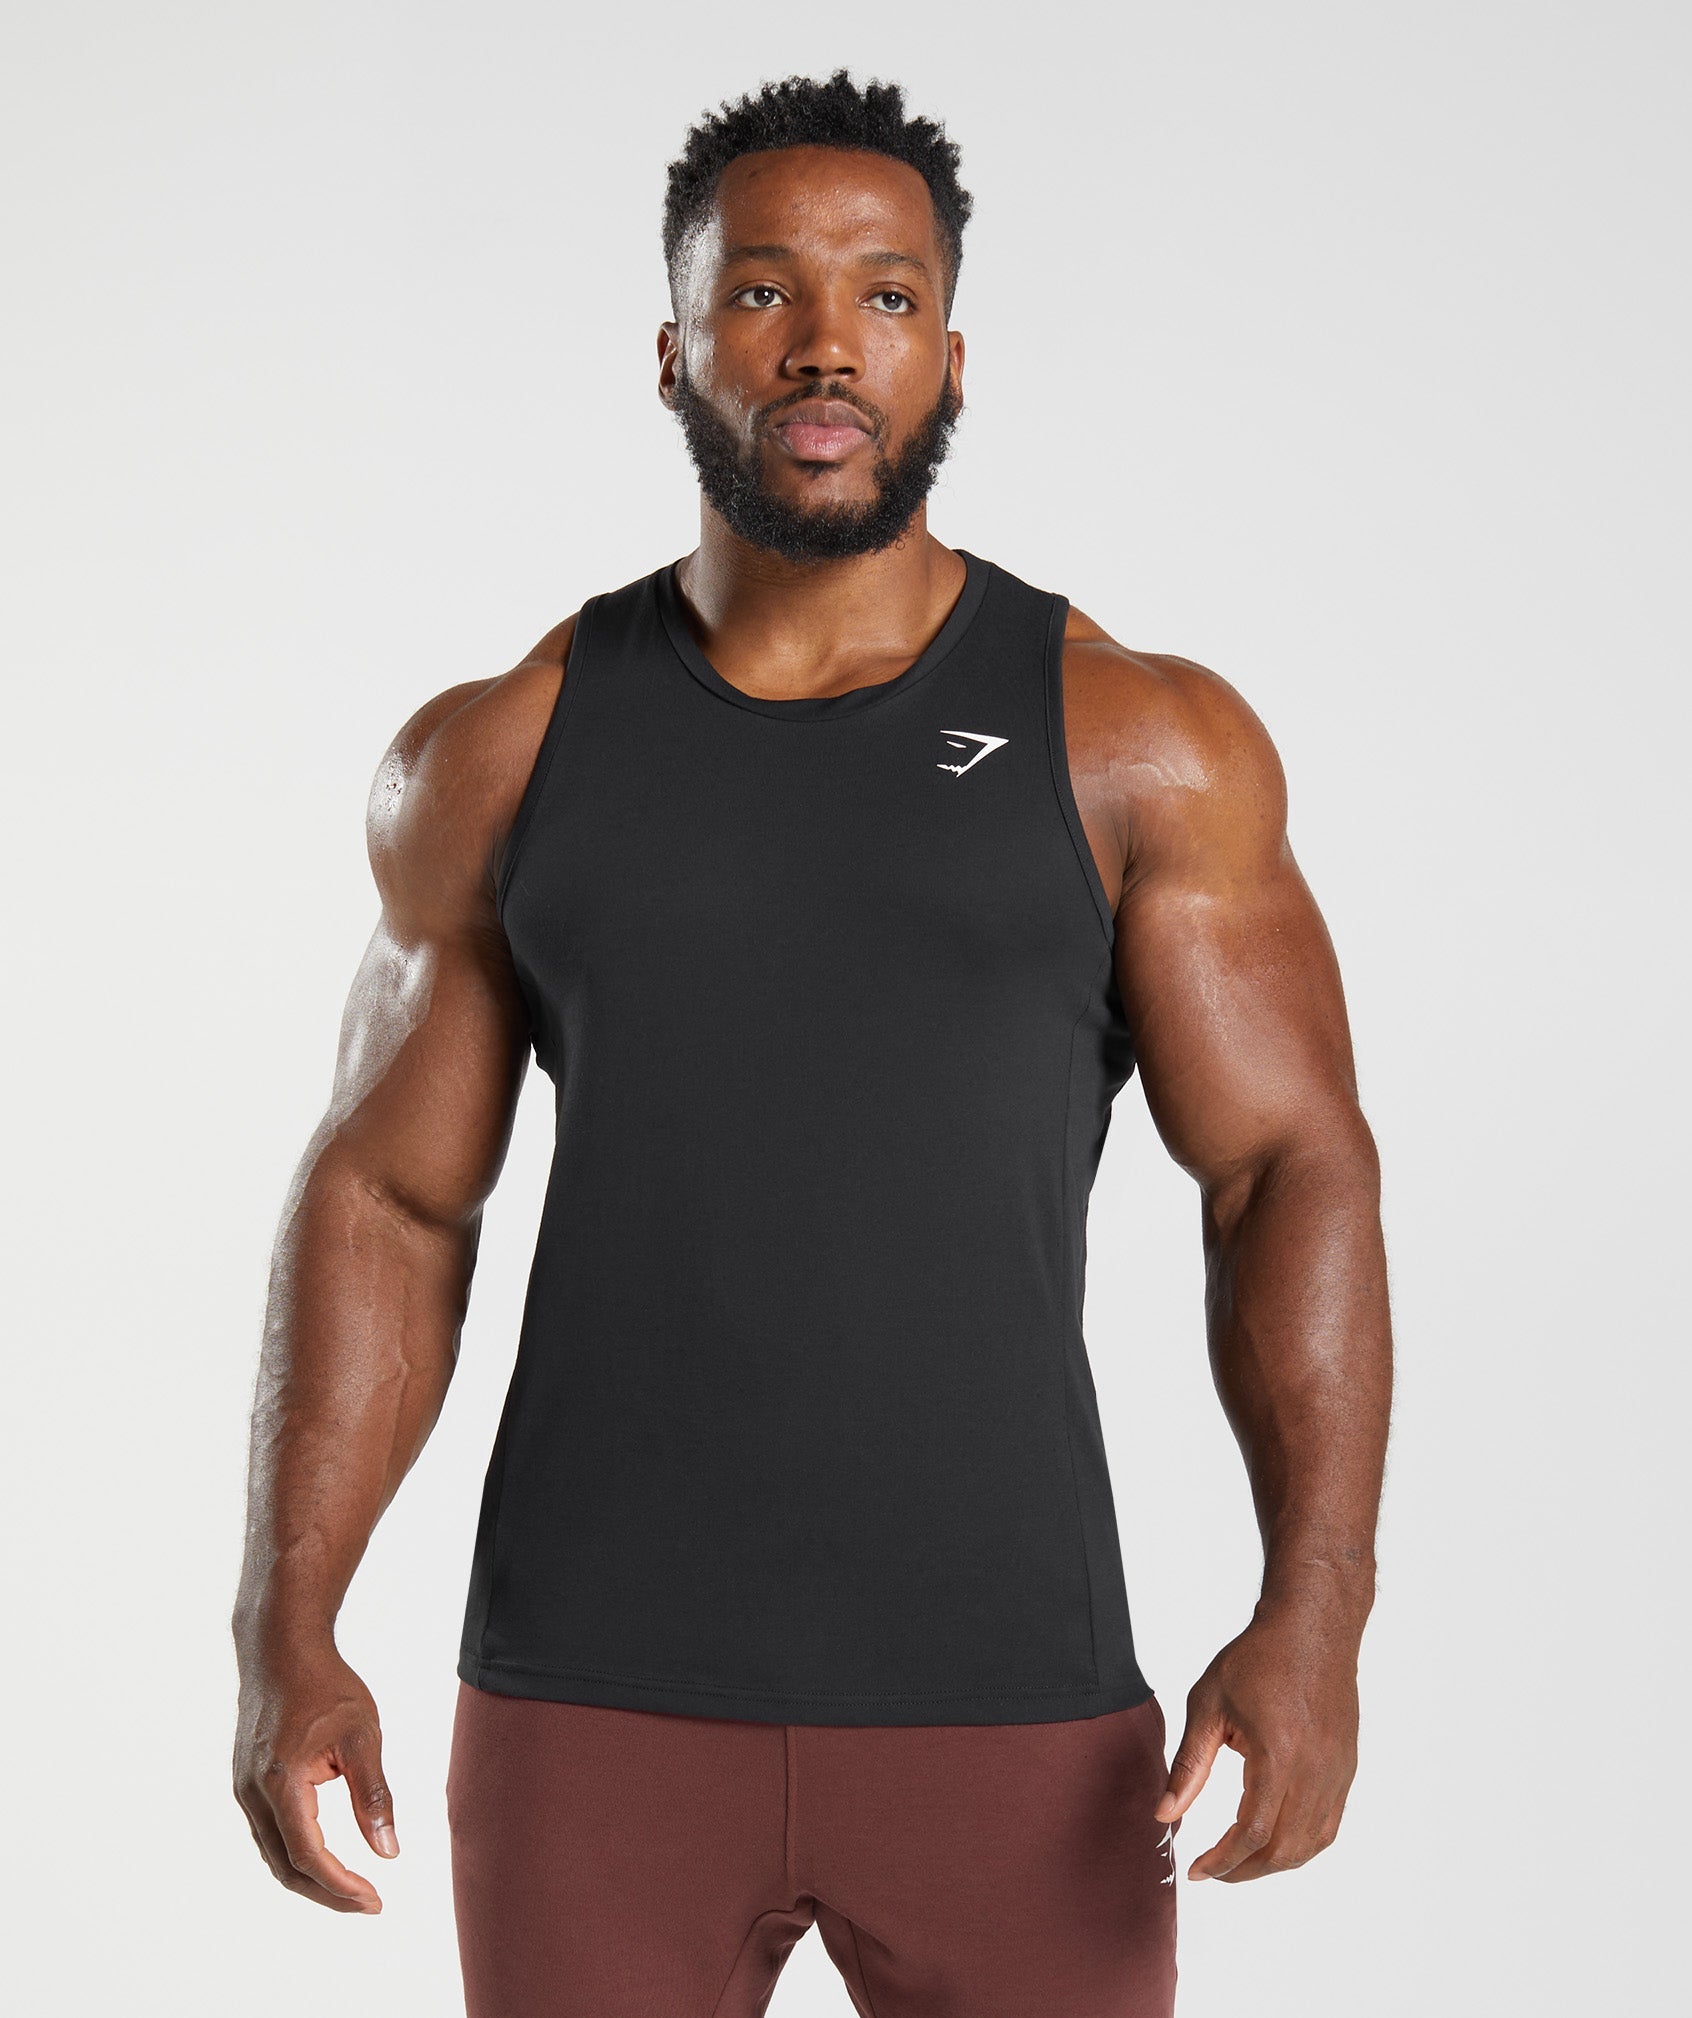 All Products, Men's Gym Clothes